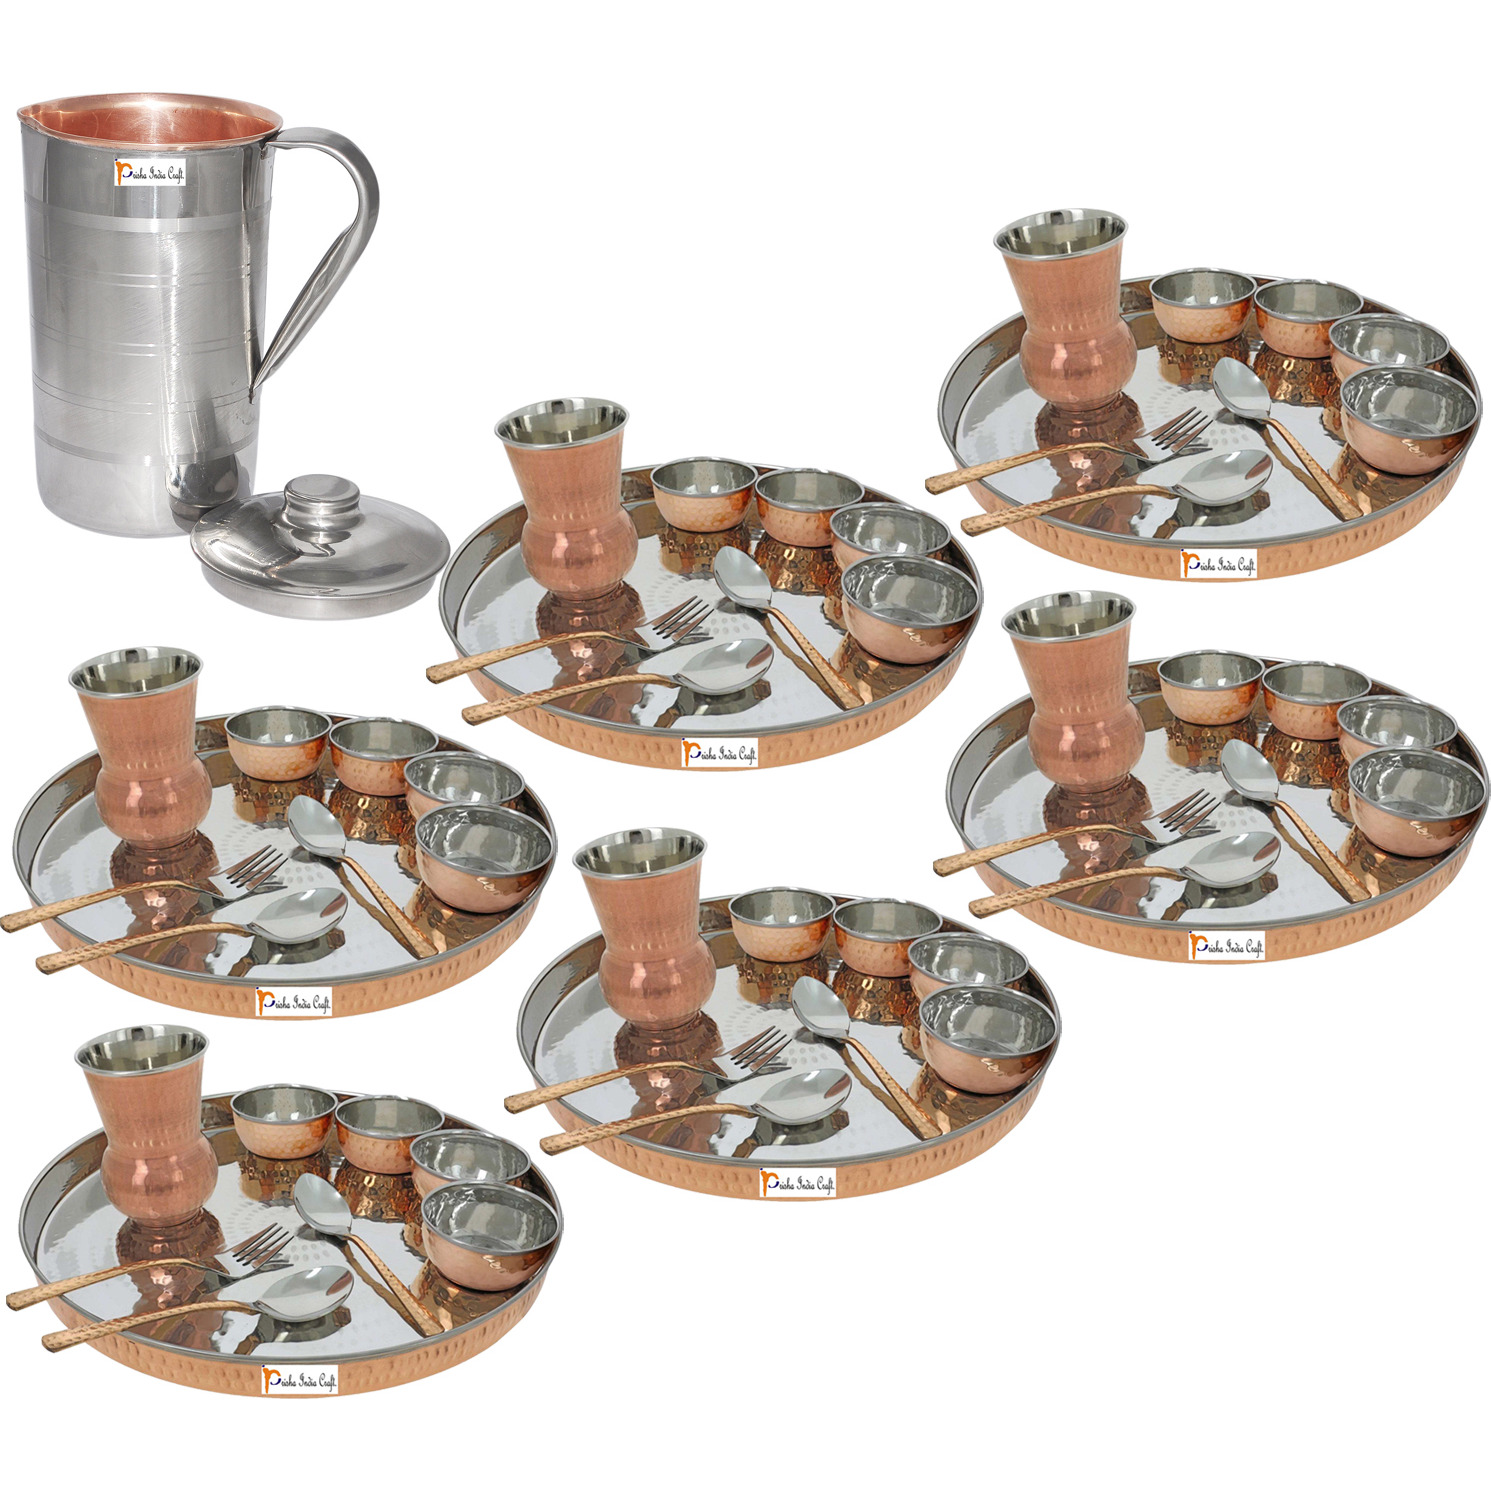 Prisha India Craft B. Set of 6 Dinnerware Traditional Stainless Steel Copper Dinner Set of Thali Plate, Bowls, Glass and Spoons, Dia 13  With 1 Luxury Style Pitcher Jug - Christmas Gift